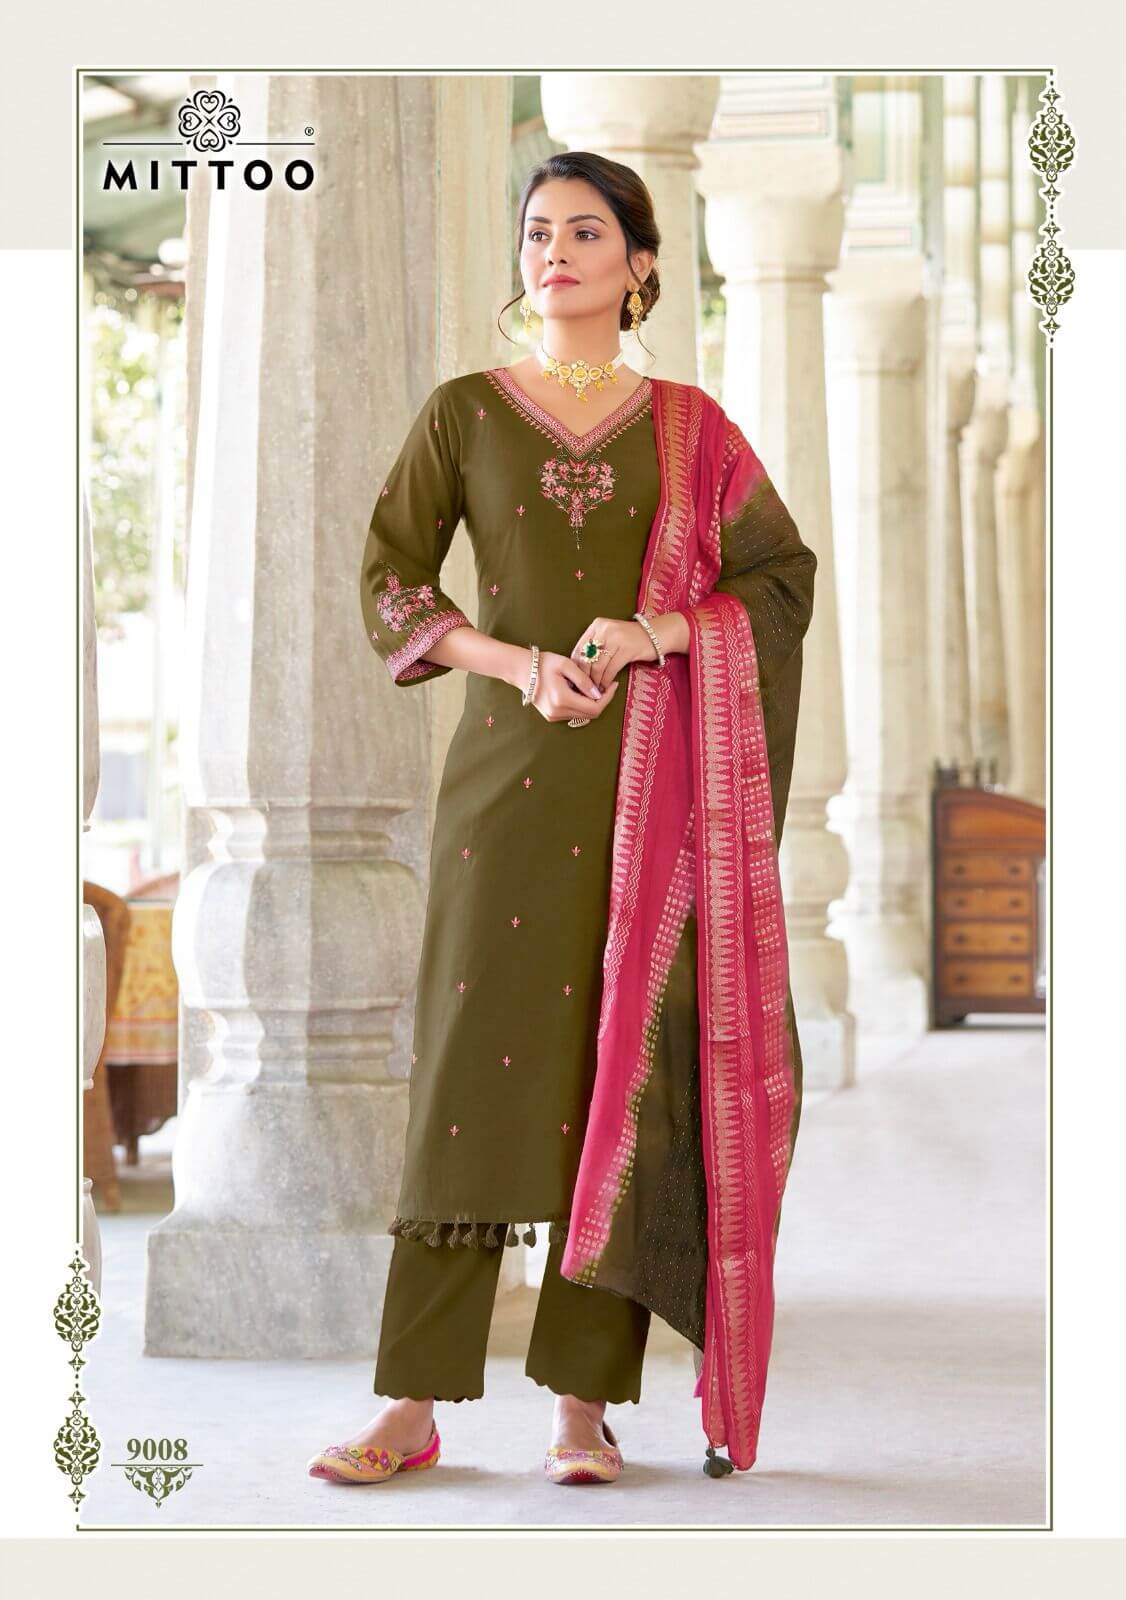 Mittoo Mosam Vol 2 Embroidery Salwar Kameez Catalog collection 7